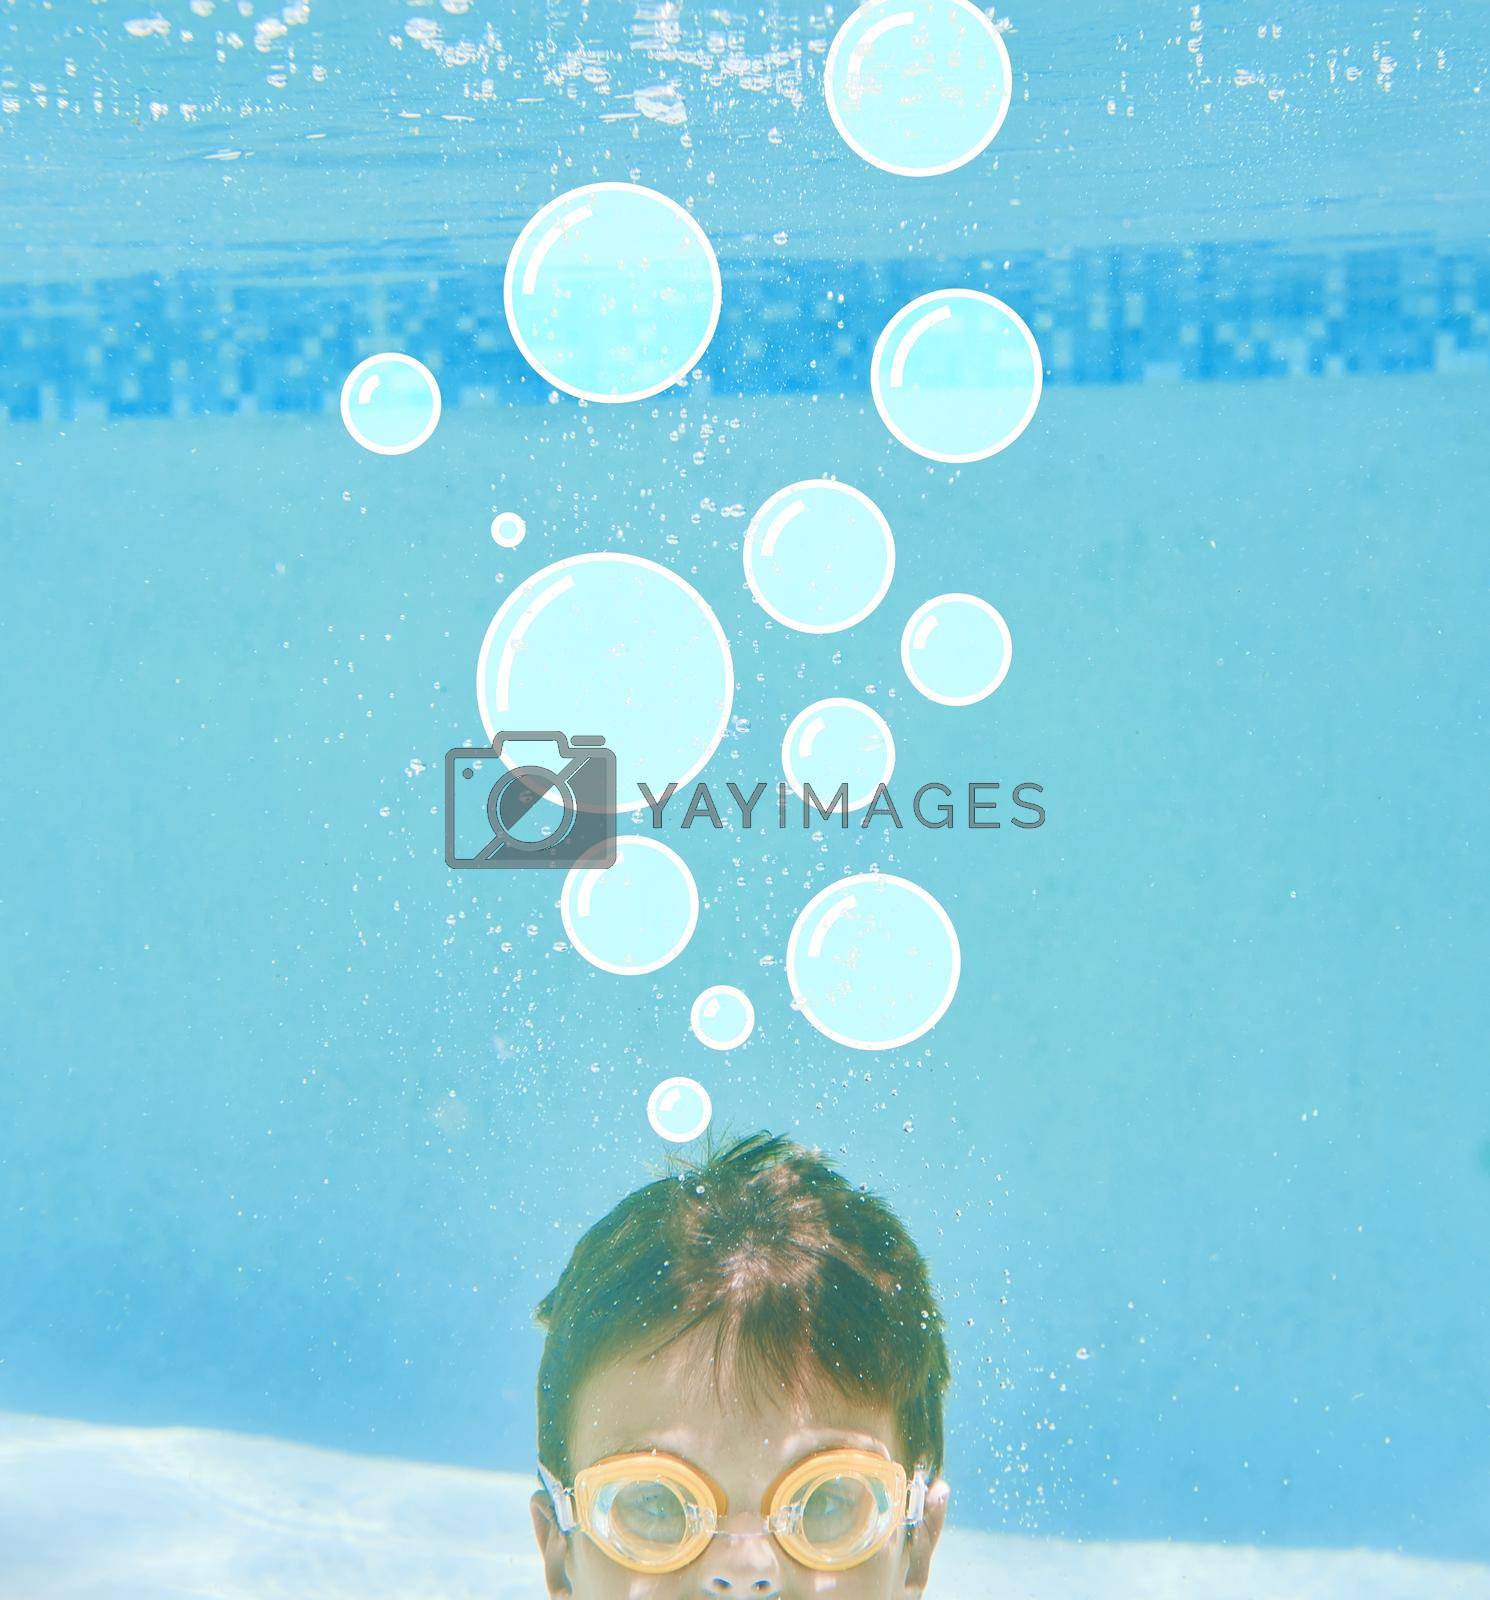 Royalty free image of Whats on your mind. Shot of a little boy swimming underwater with bubbles above his head. by YuriArcurs